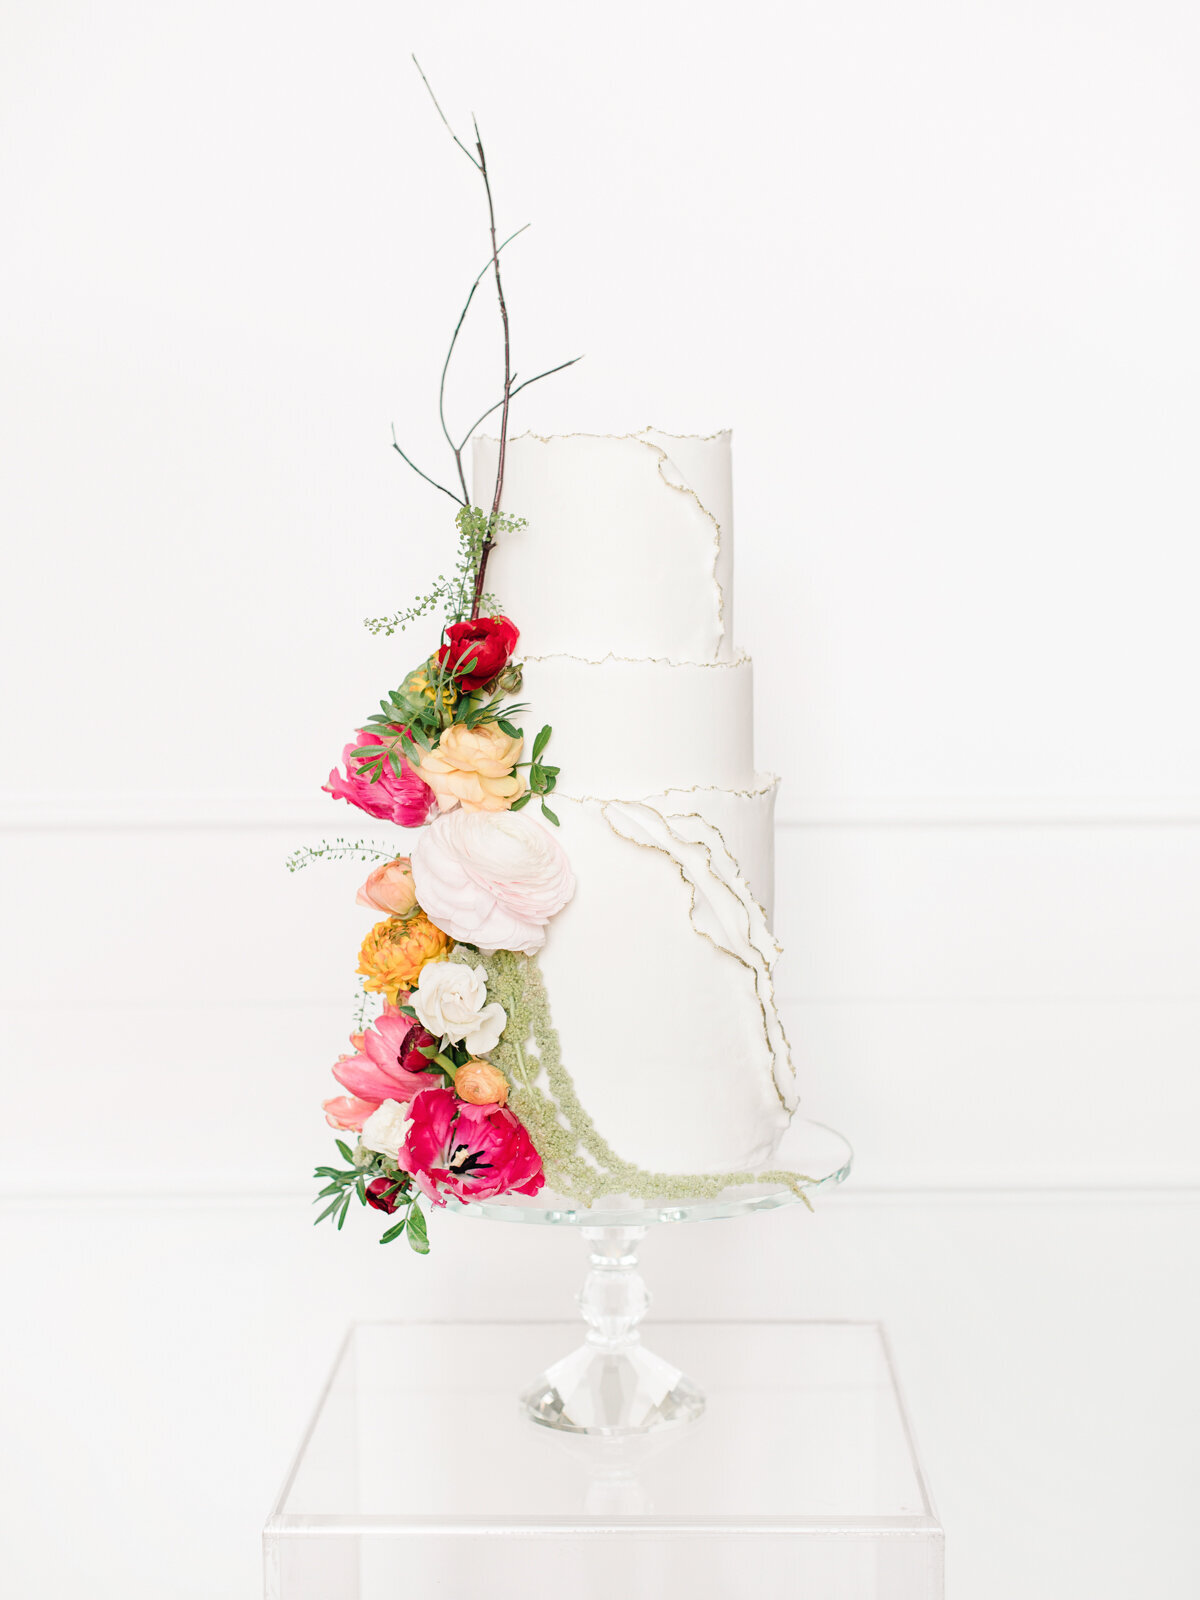 Three-tiered classic white professional wedding cake with modern, vibrant florals, created by Bake My Day, contemporary cakes & desserts in Calgary, Alberta, featured on the Brontë Bride Vendor Guide.